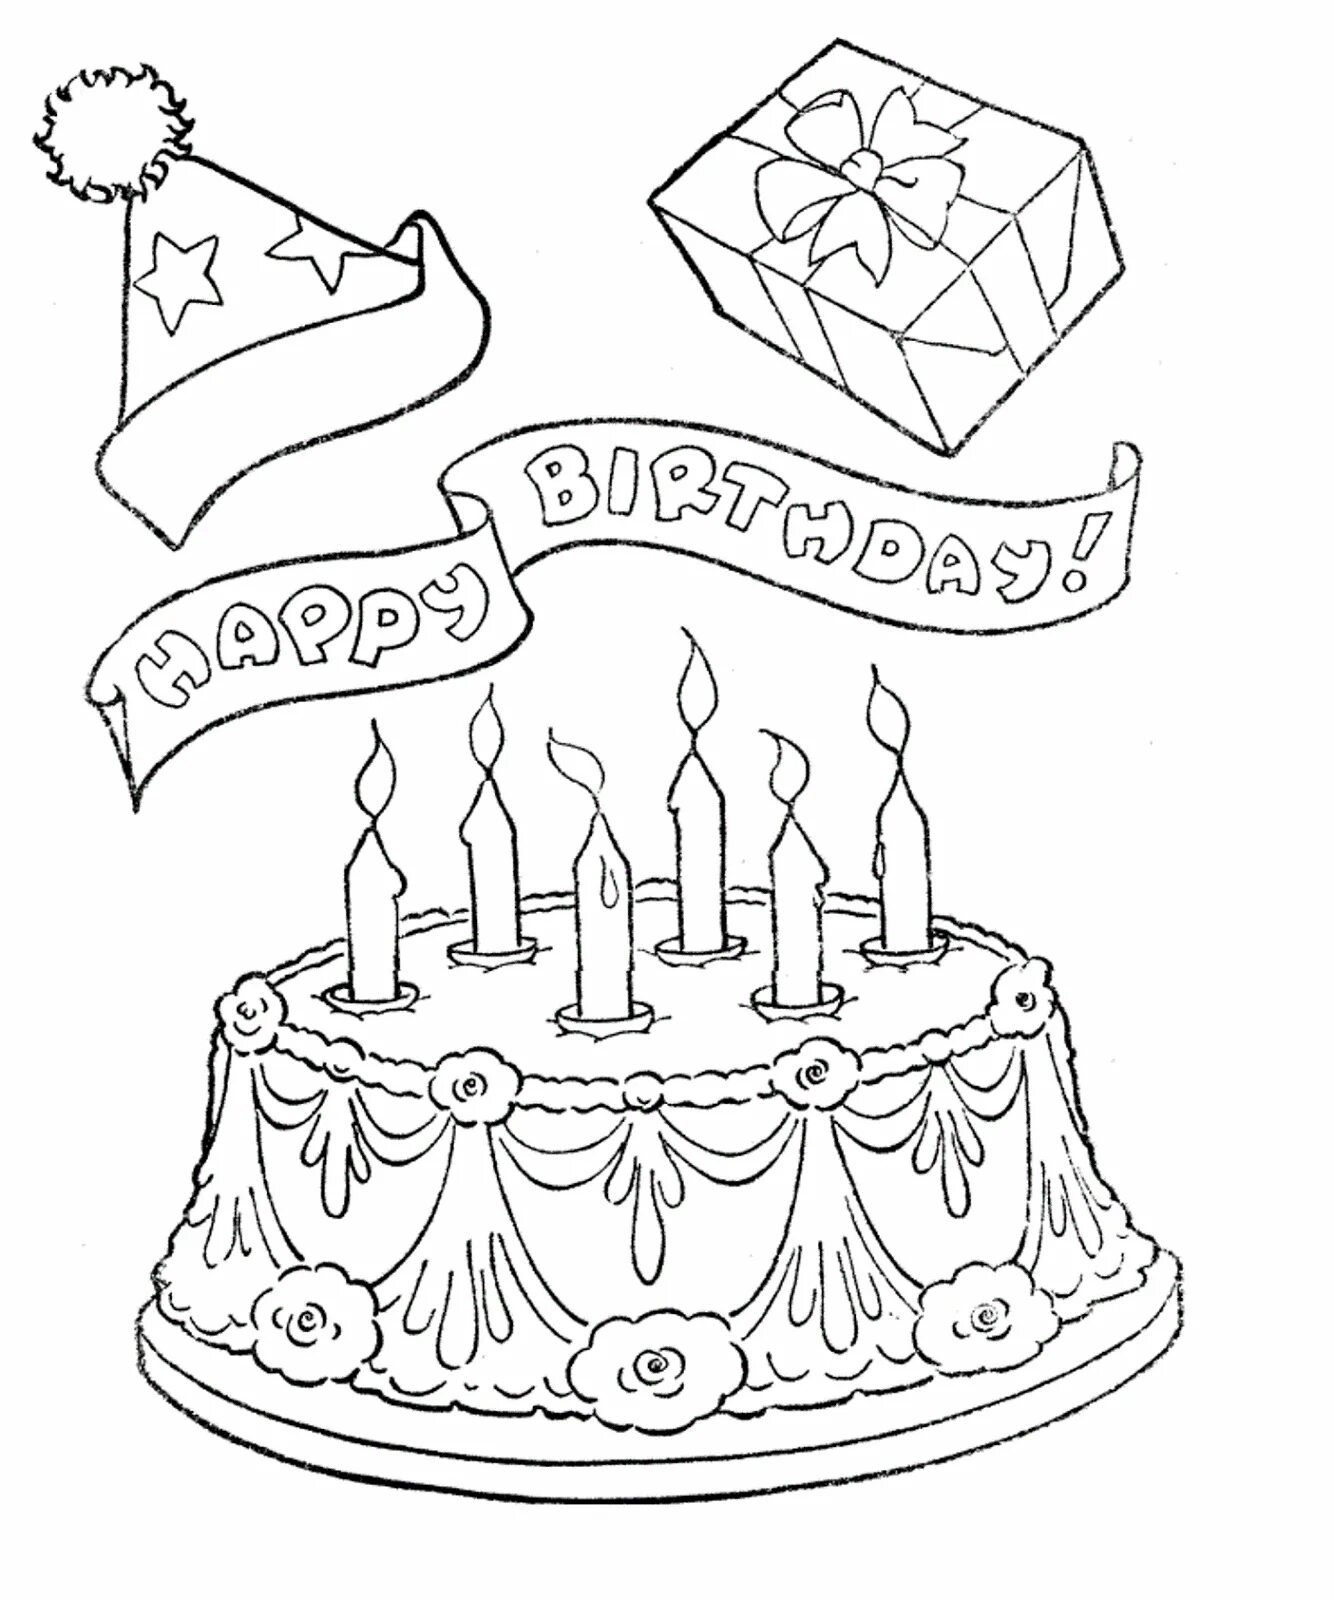 Amazing coloring book for a friend's birthday